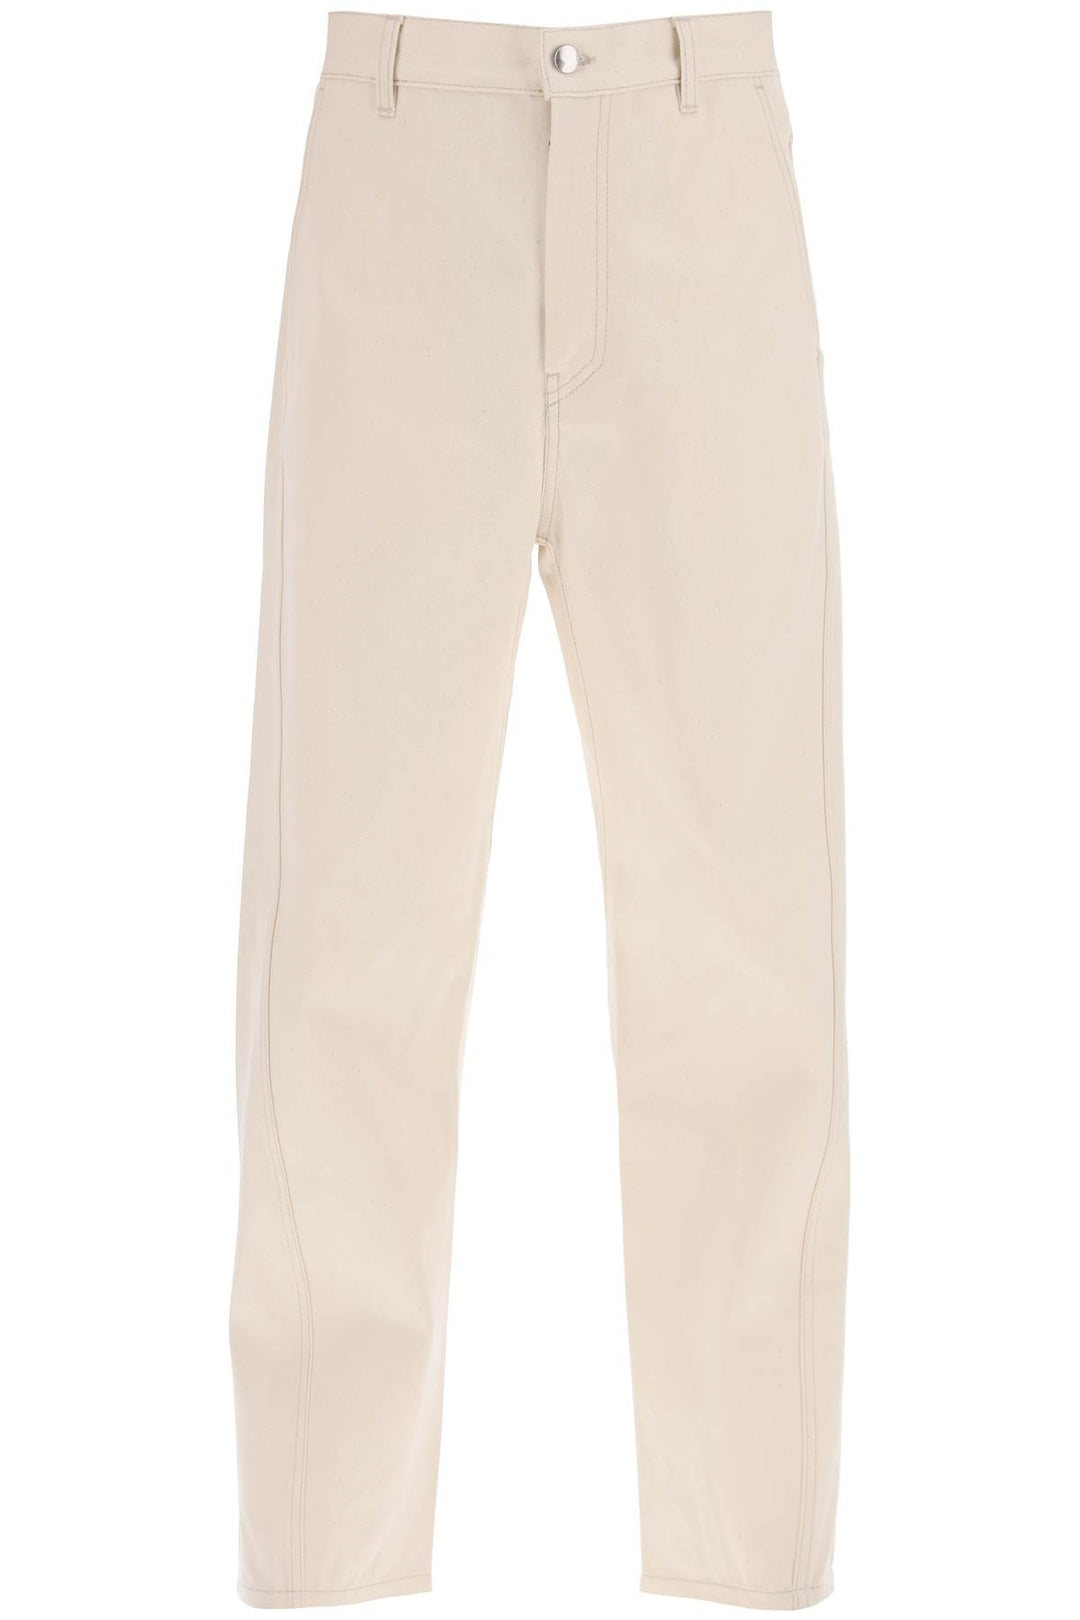 Oamc 'Cortes' Cropped Jeans   Beige